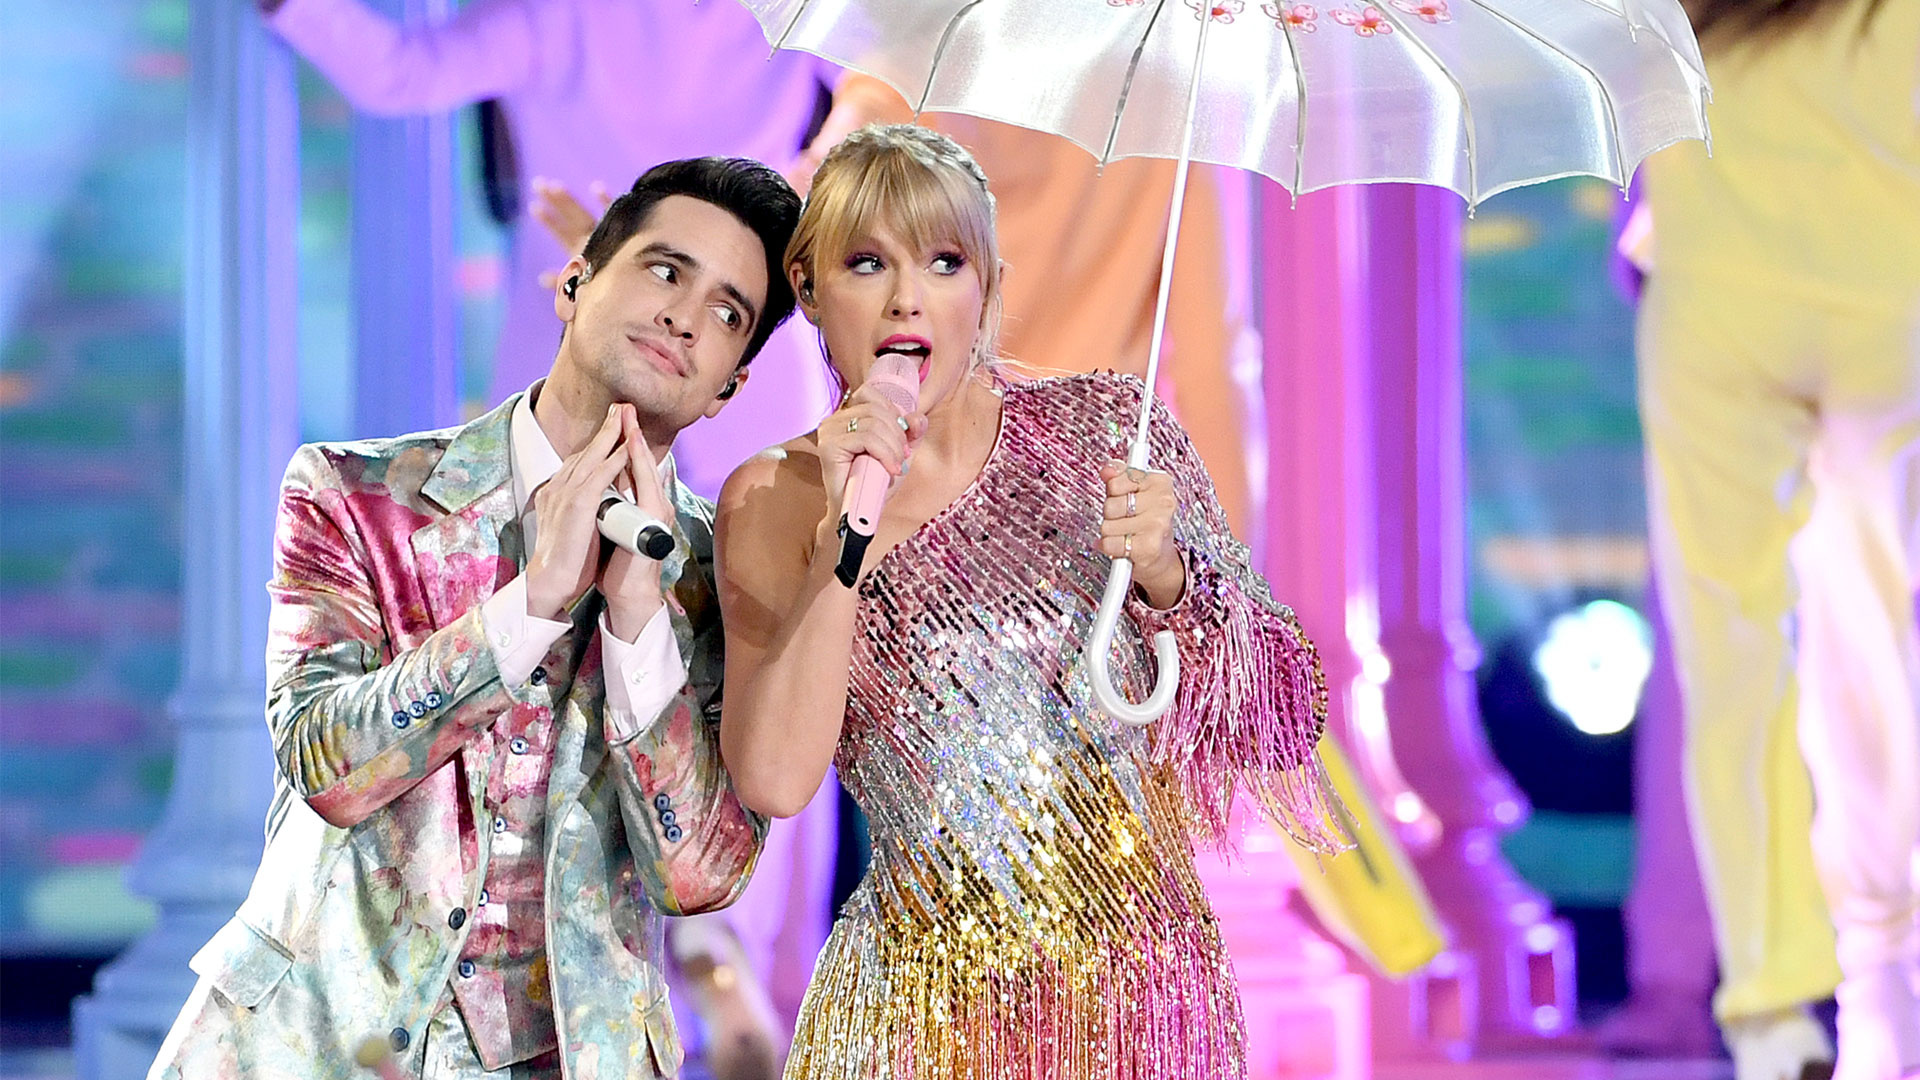 Brendon Urie: Taylor Swift featuring Urie, Performing at BBMAs. 1920x1080 Full HD Wallpaper.